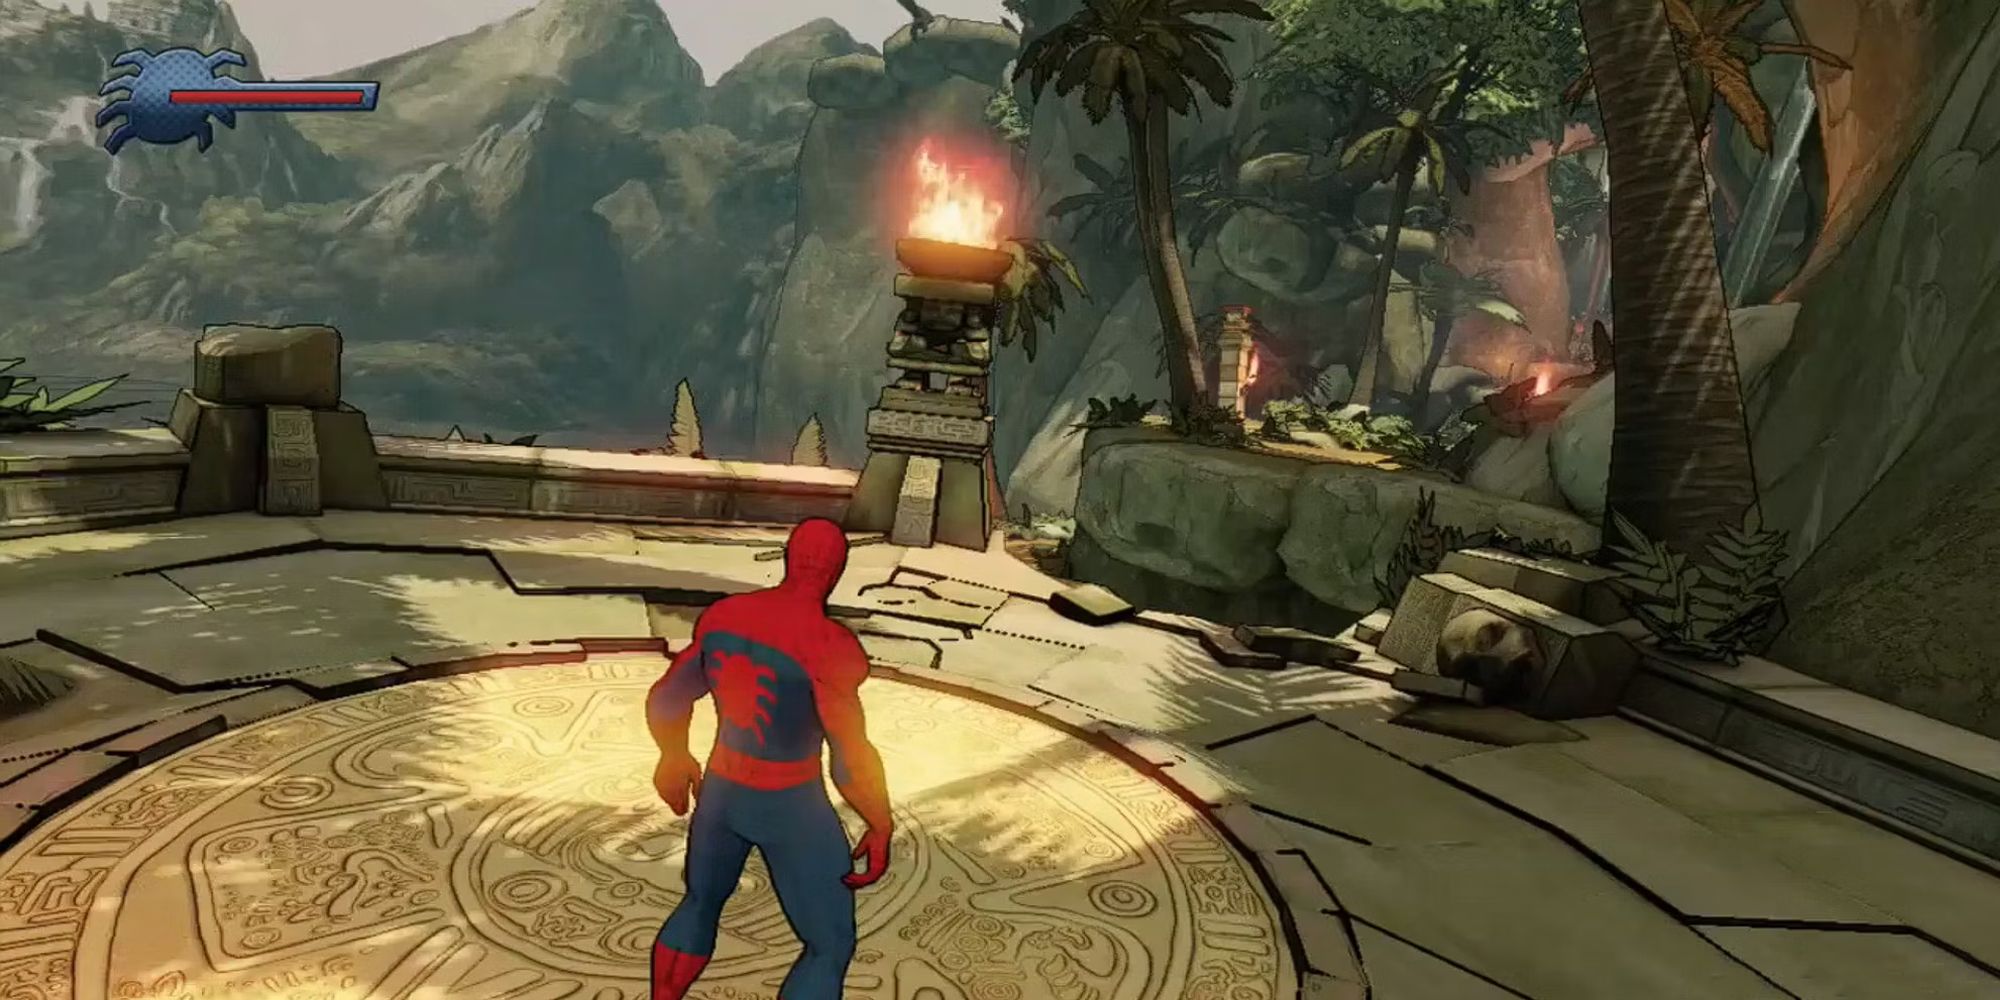 Spiderman Shattered Dimensions Xbox 360 jungle temple setting